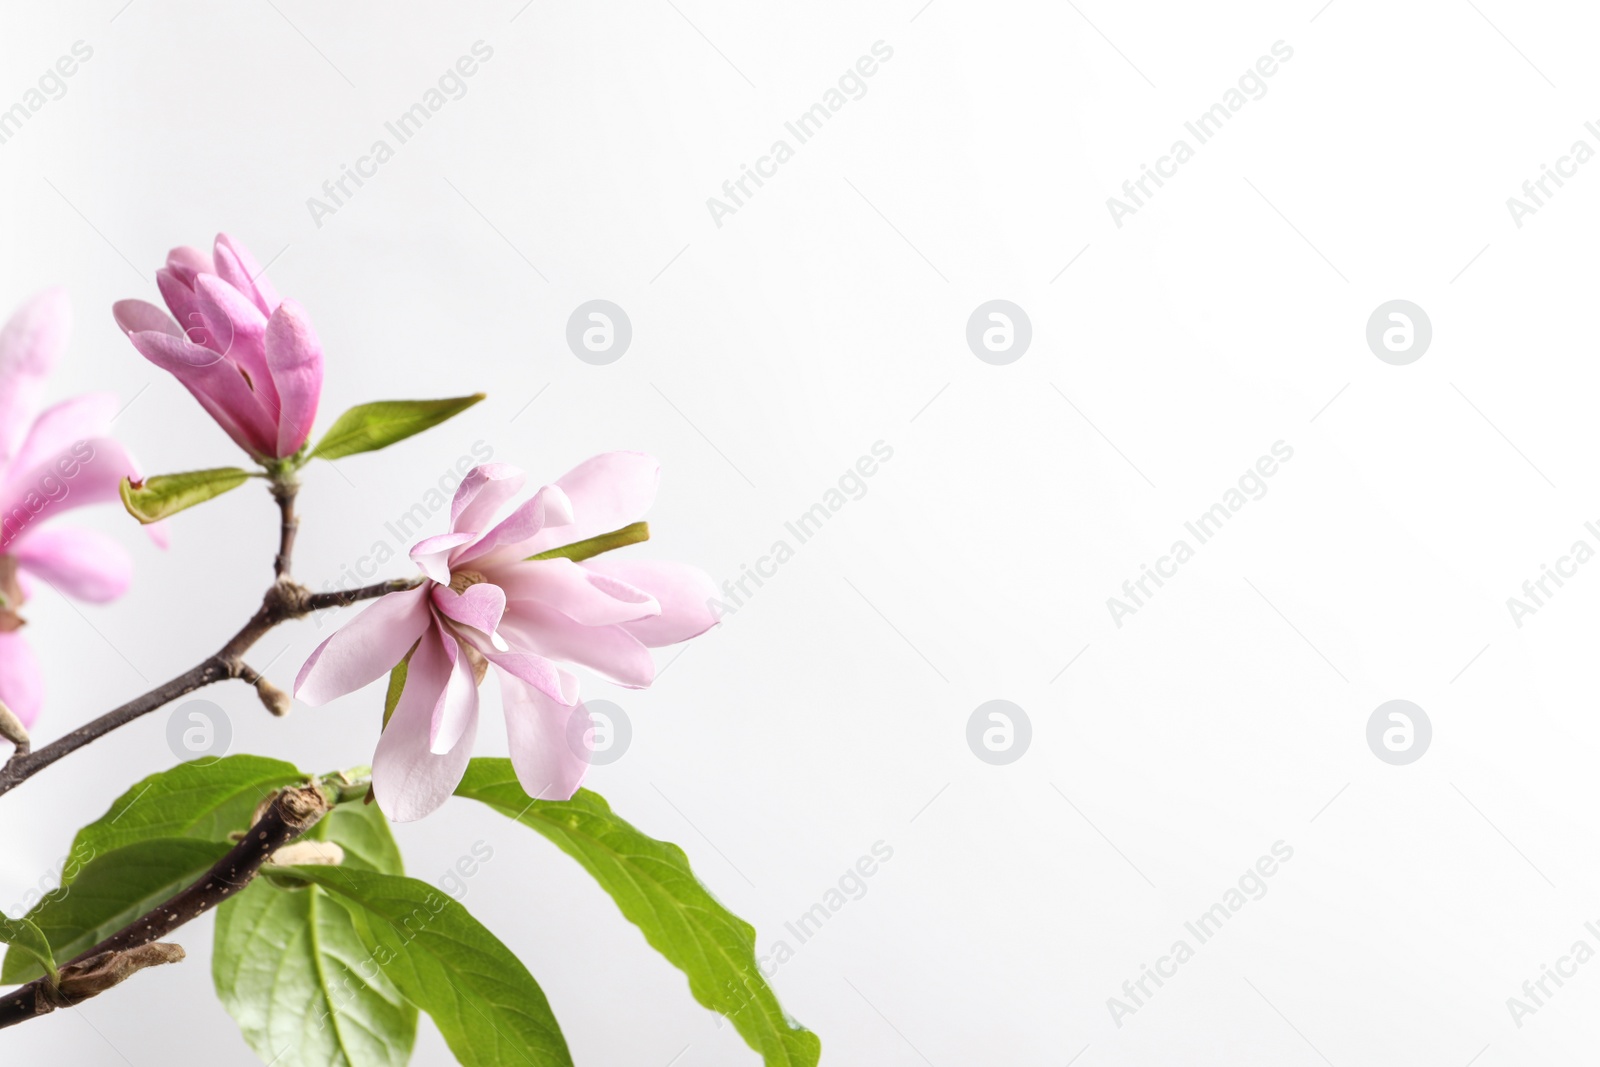 Photo of Magnolia tree branches with beautiful flowers on white background